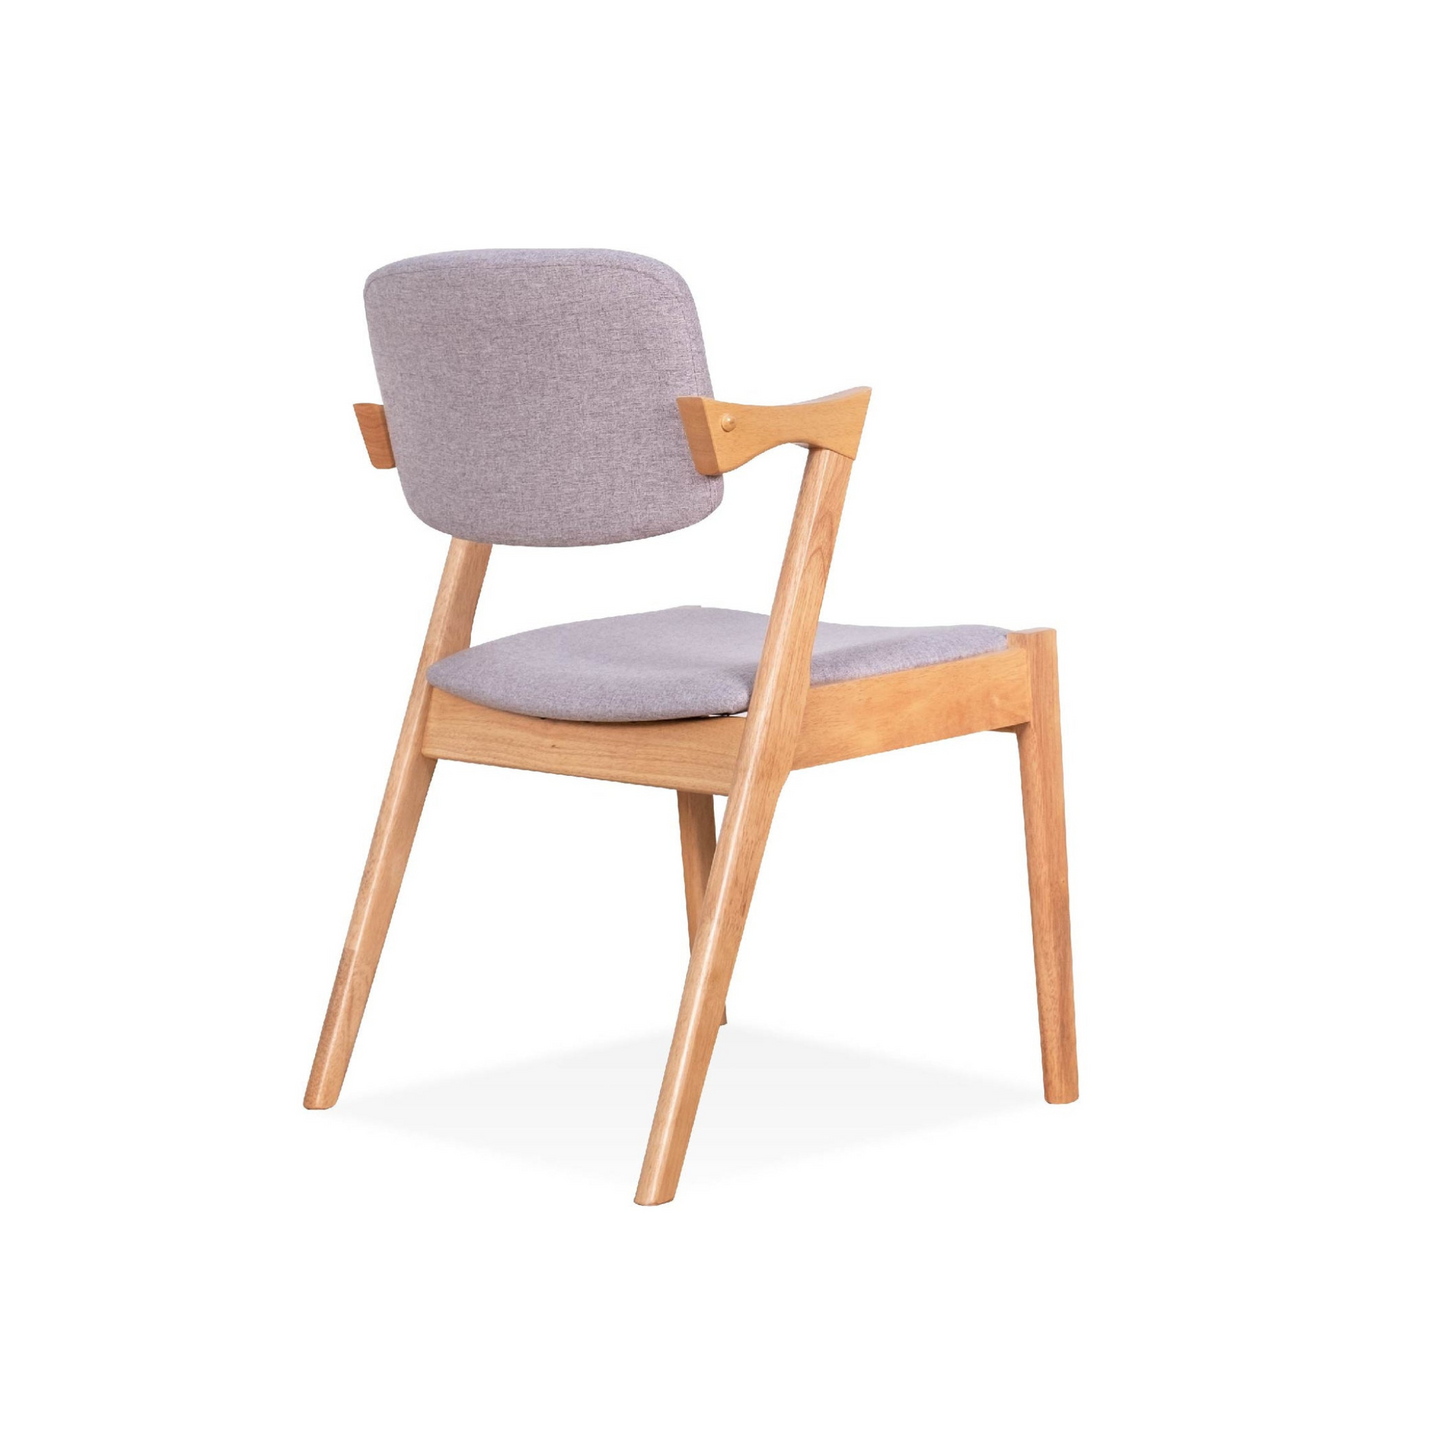 Zack Dining Chair in Natural